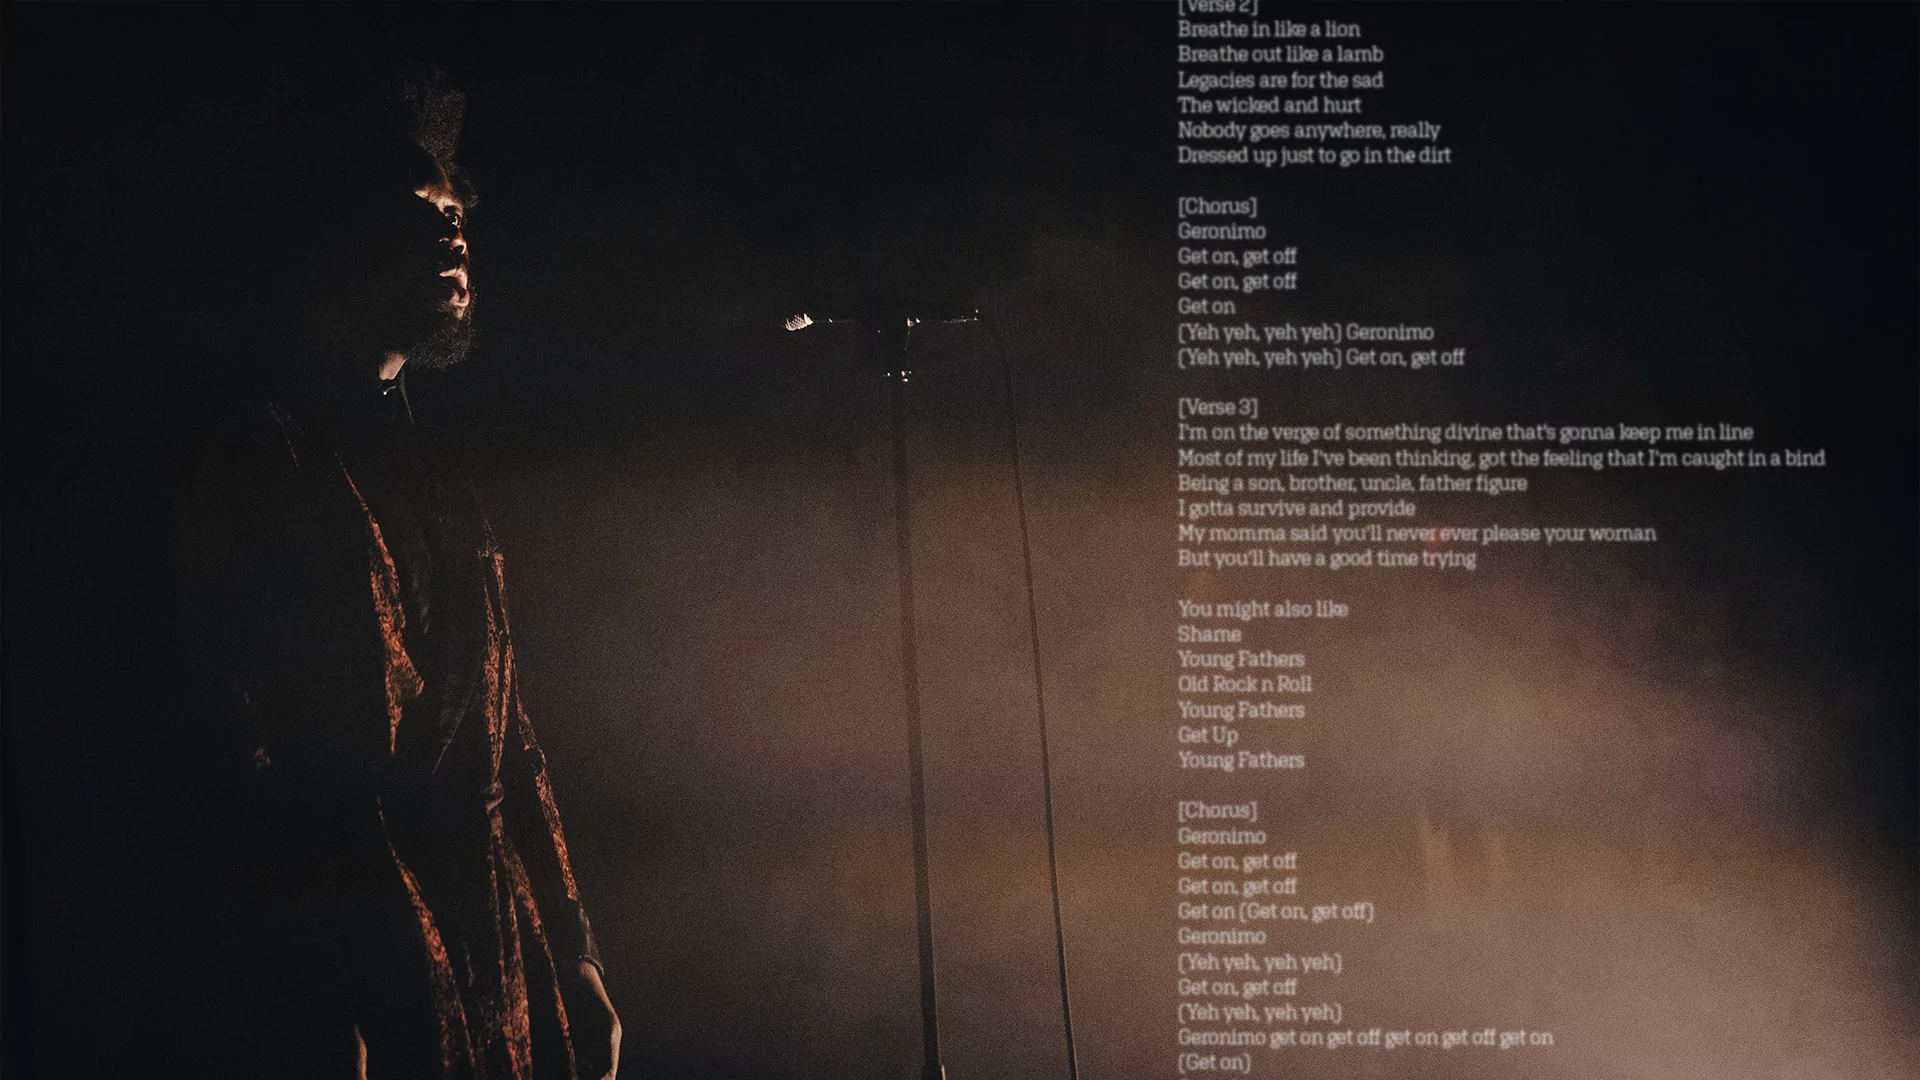 Photo of Young Fathers performing with a microphone with lyrics spliced across the image